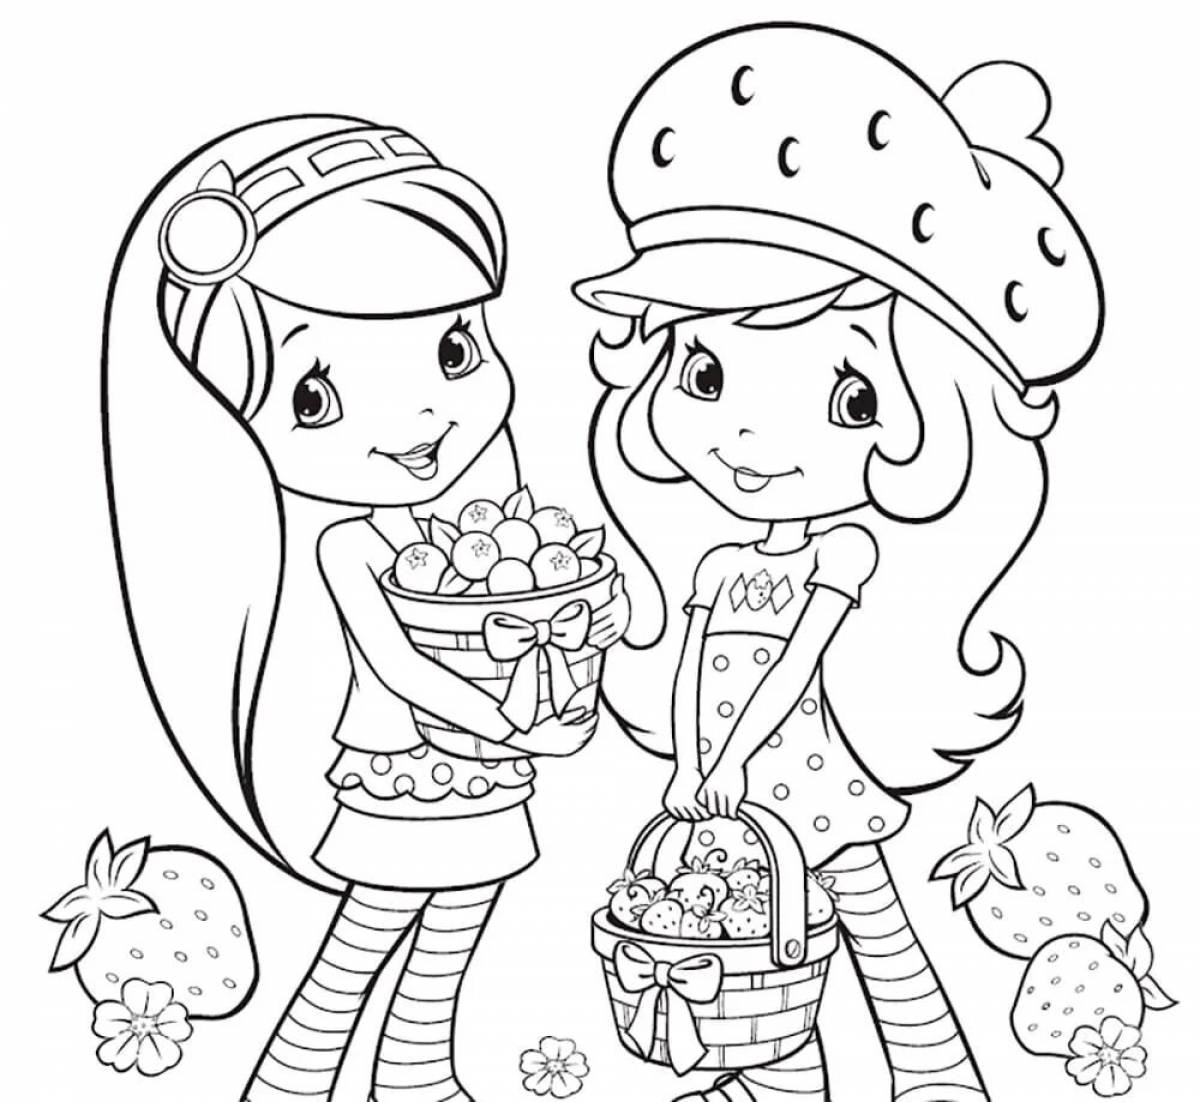 Stimulating coloring page 4 for girls